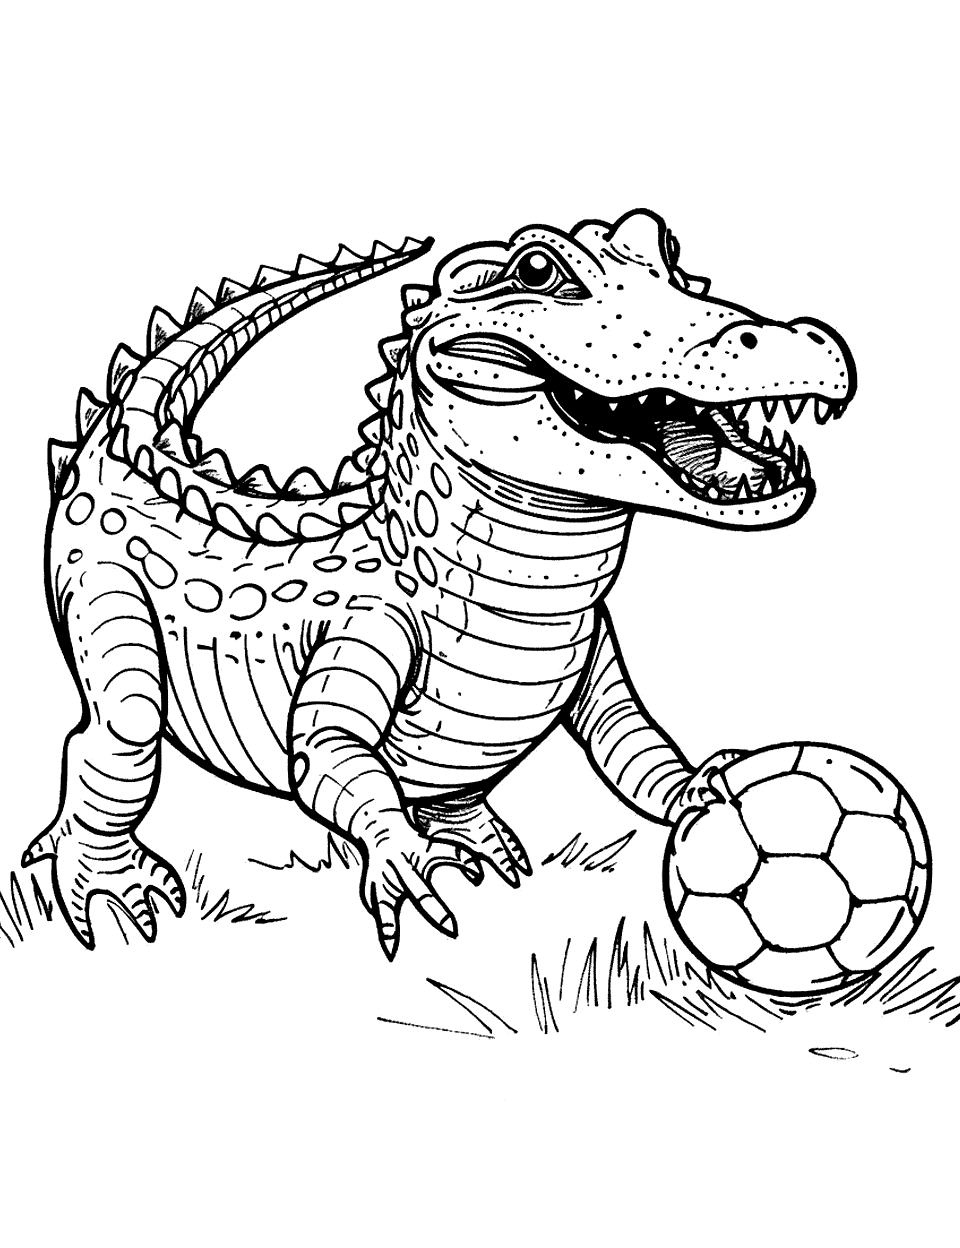 Alligator Playing Soccer Coloring Page - An alligator kicking a soccer ball on a grassy field.